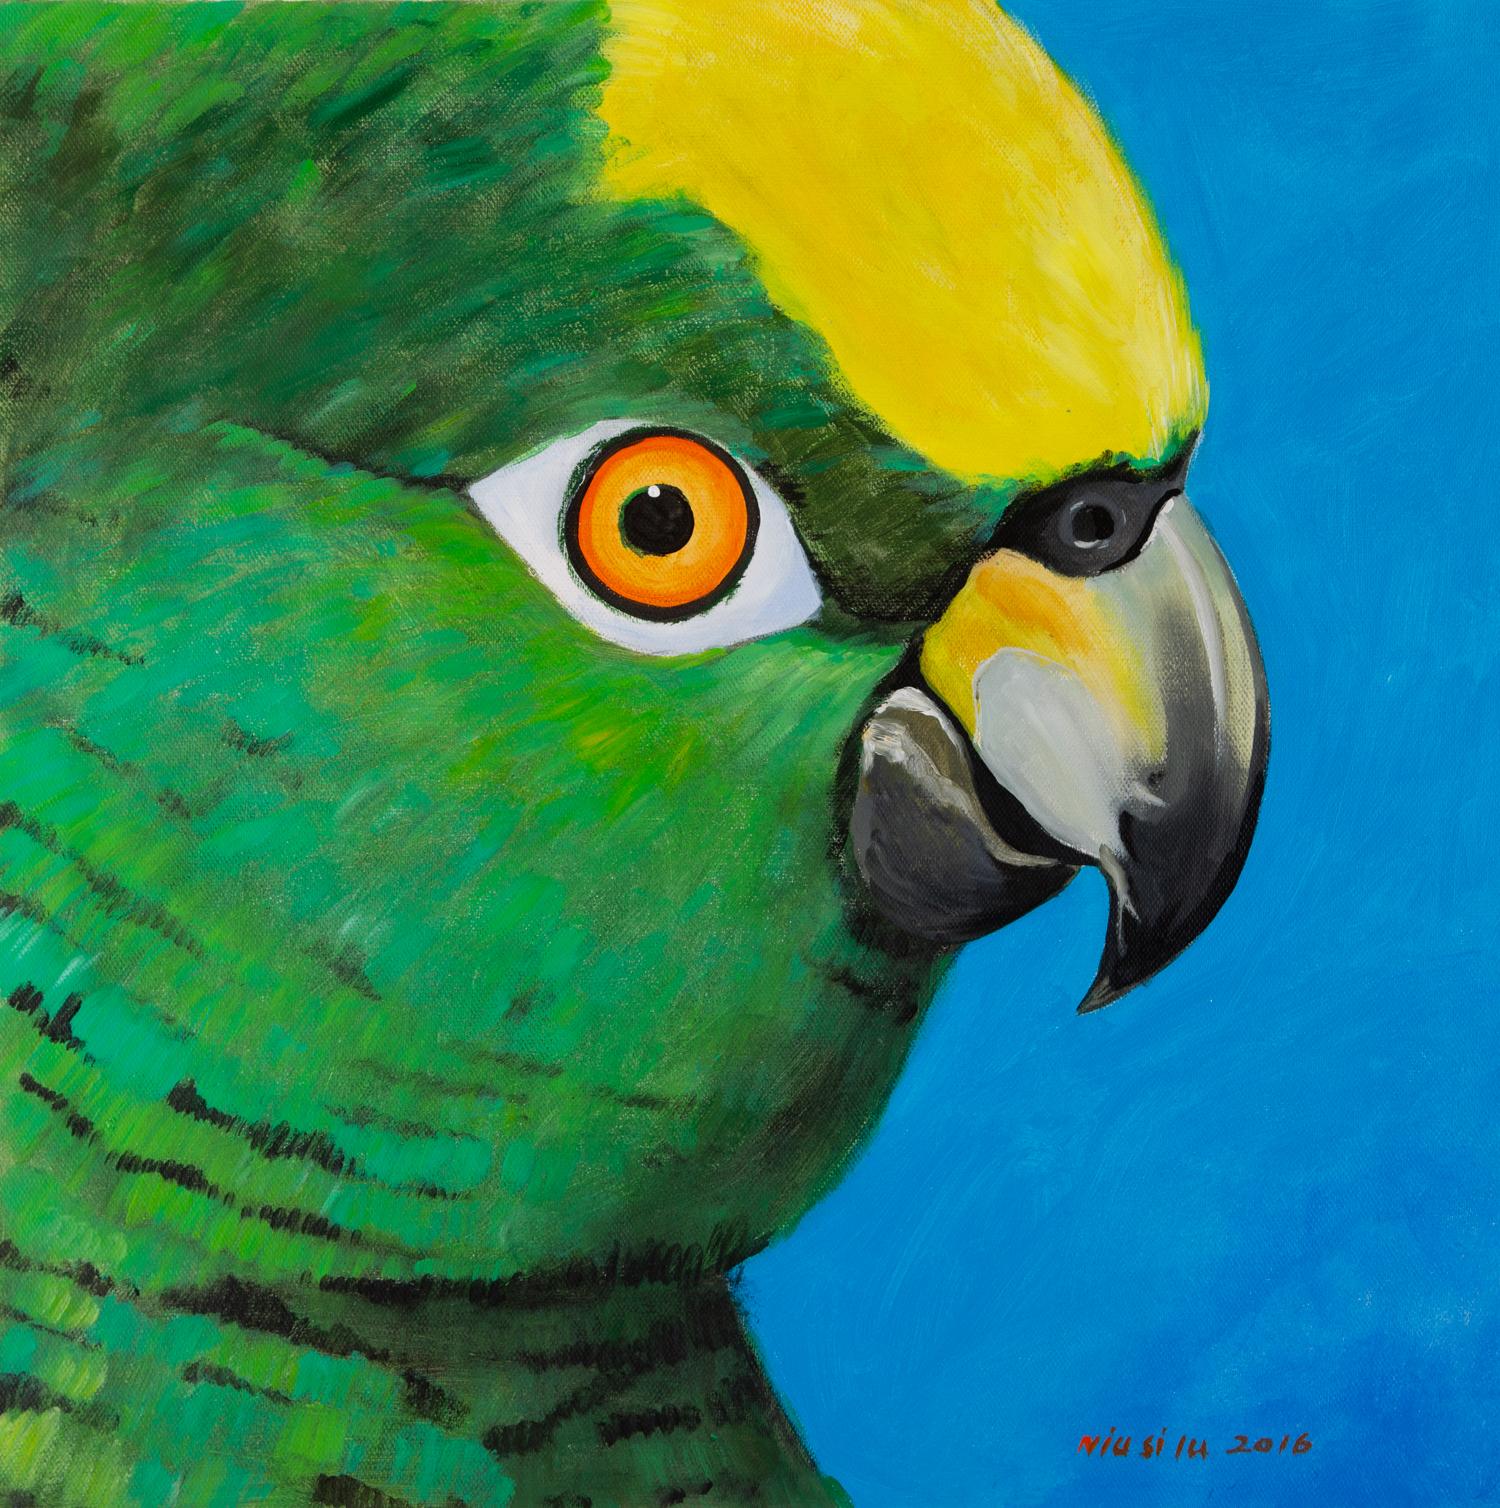  Title: Parrot
 Medium: Oil on canvas
 Size: 20 x 20inches
 Frame: Framing options available!
 Age: 2000s
 Condition: Painting appears to be in excellent condition.
 Note: This painting is unstretched
 Artist: Silu Niu
 Provenance: Direct from the